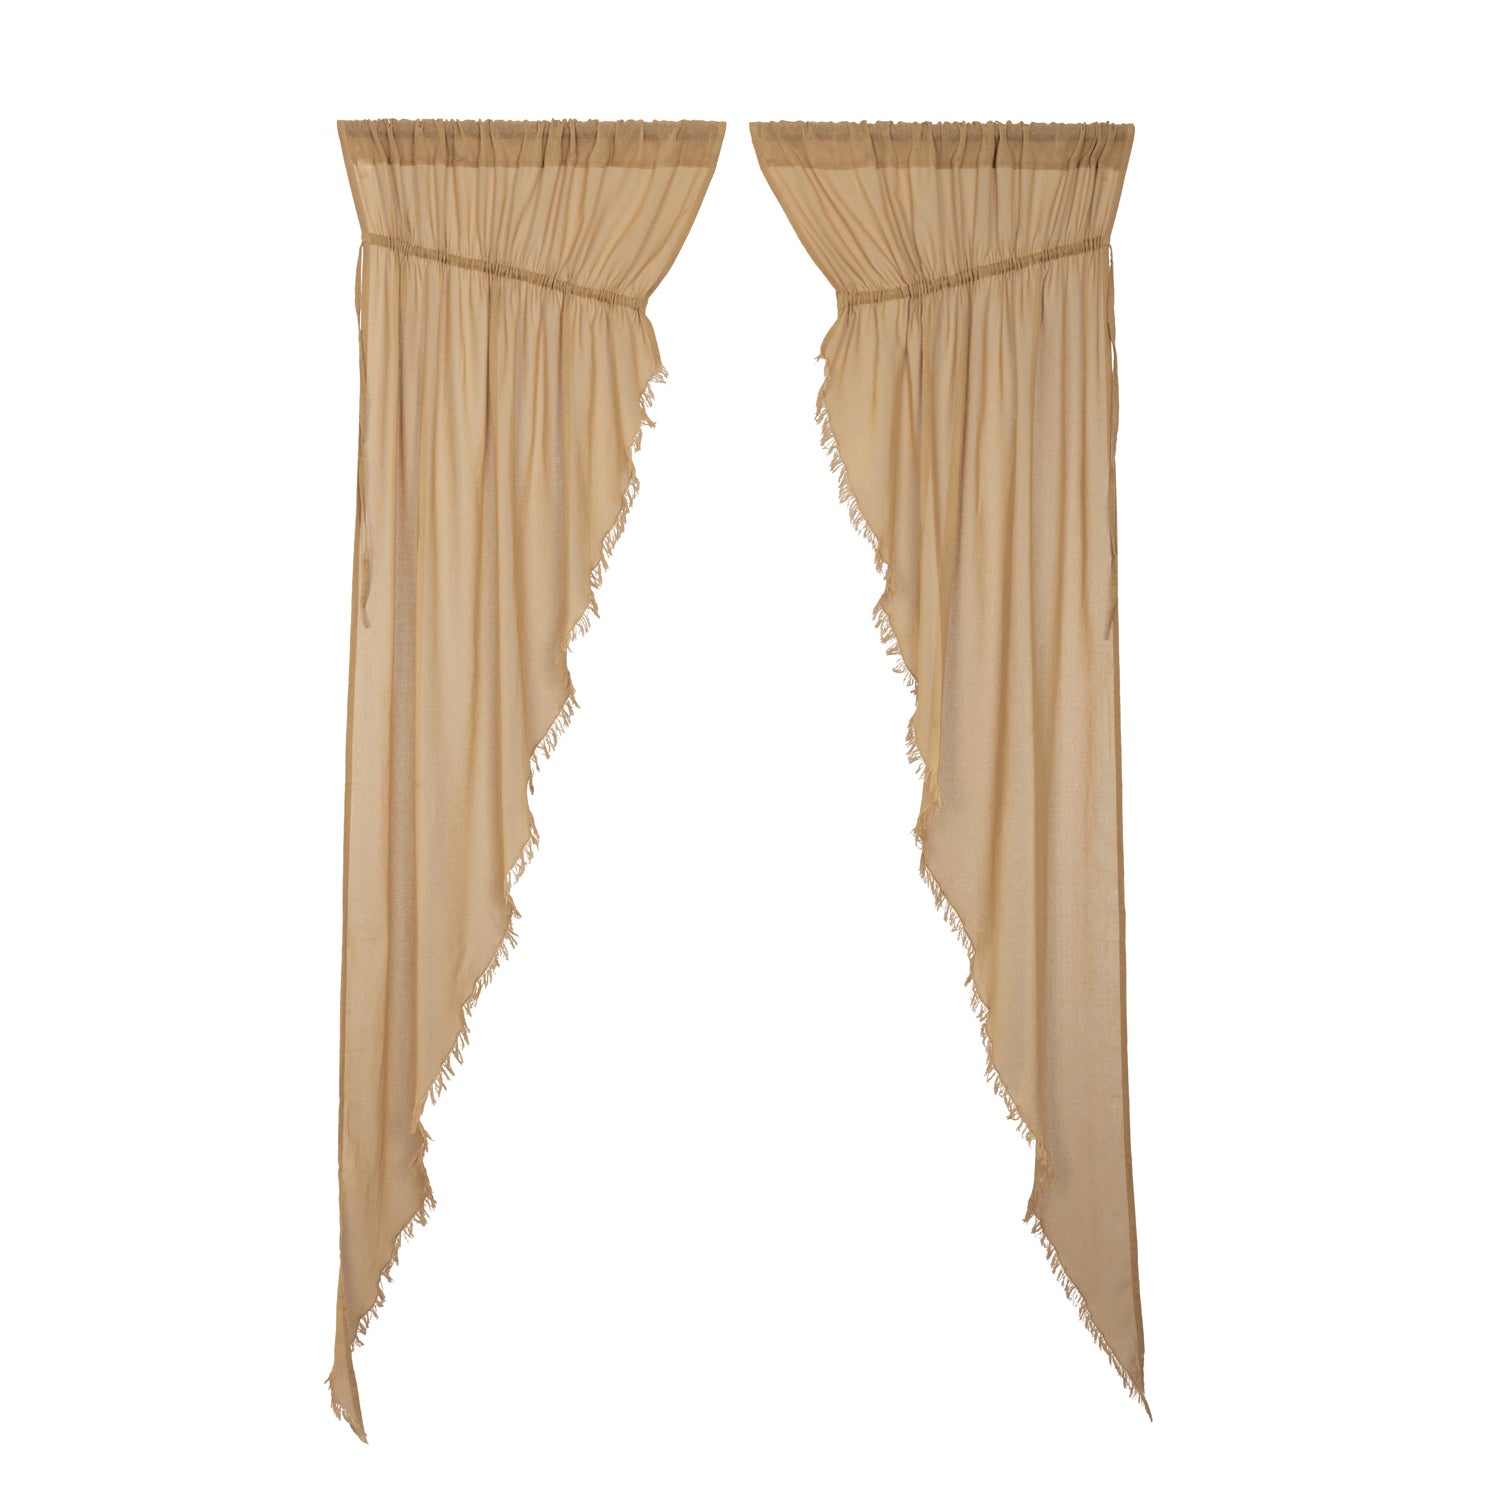 April & Olive Tobacco Cloth Khaki Prairie Long Panel Fringed Set of 2 84x36x18 By VHC Brands